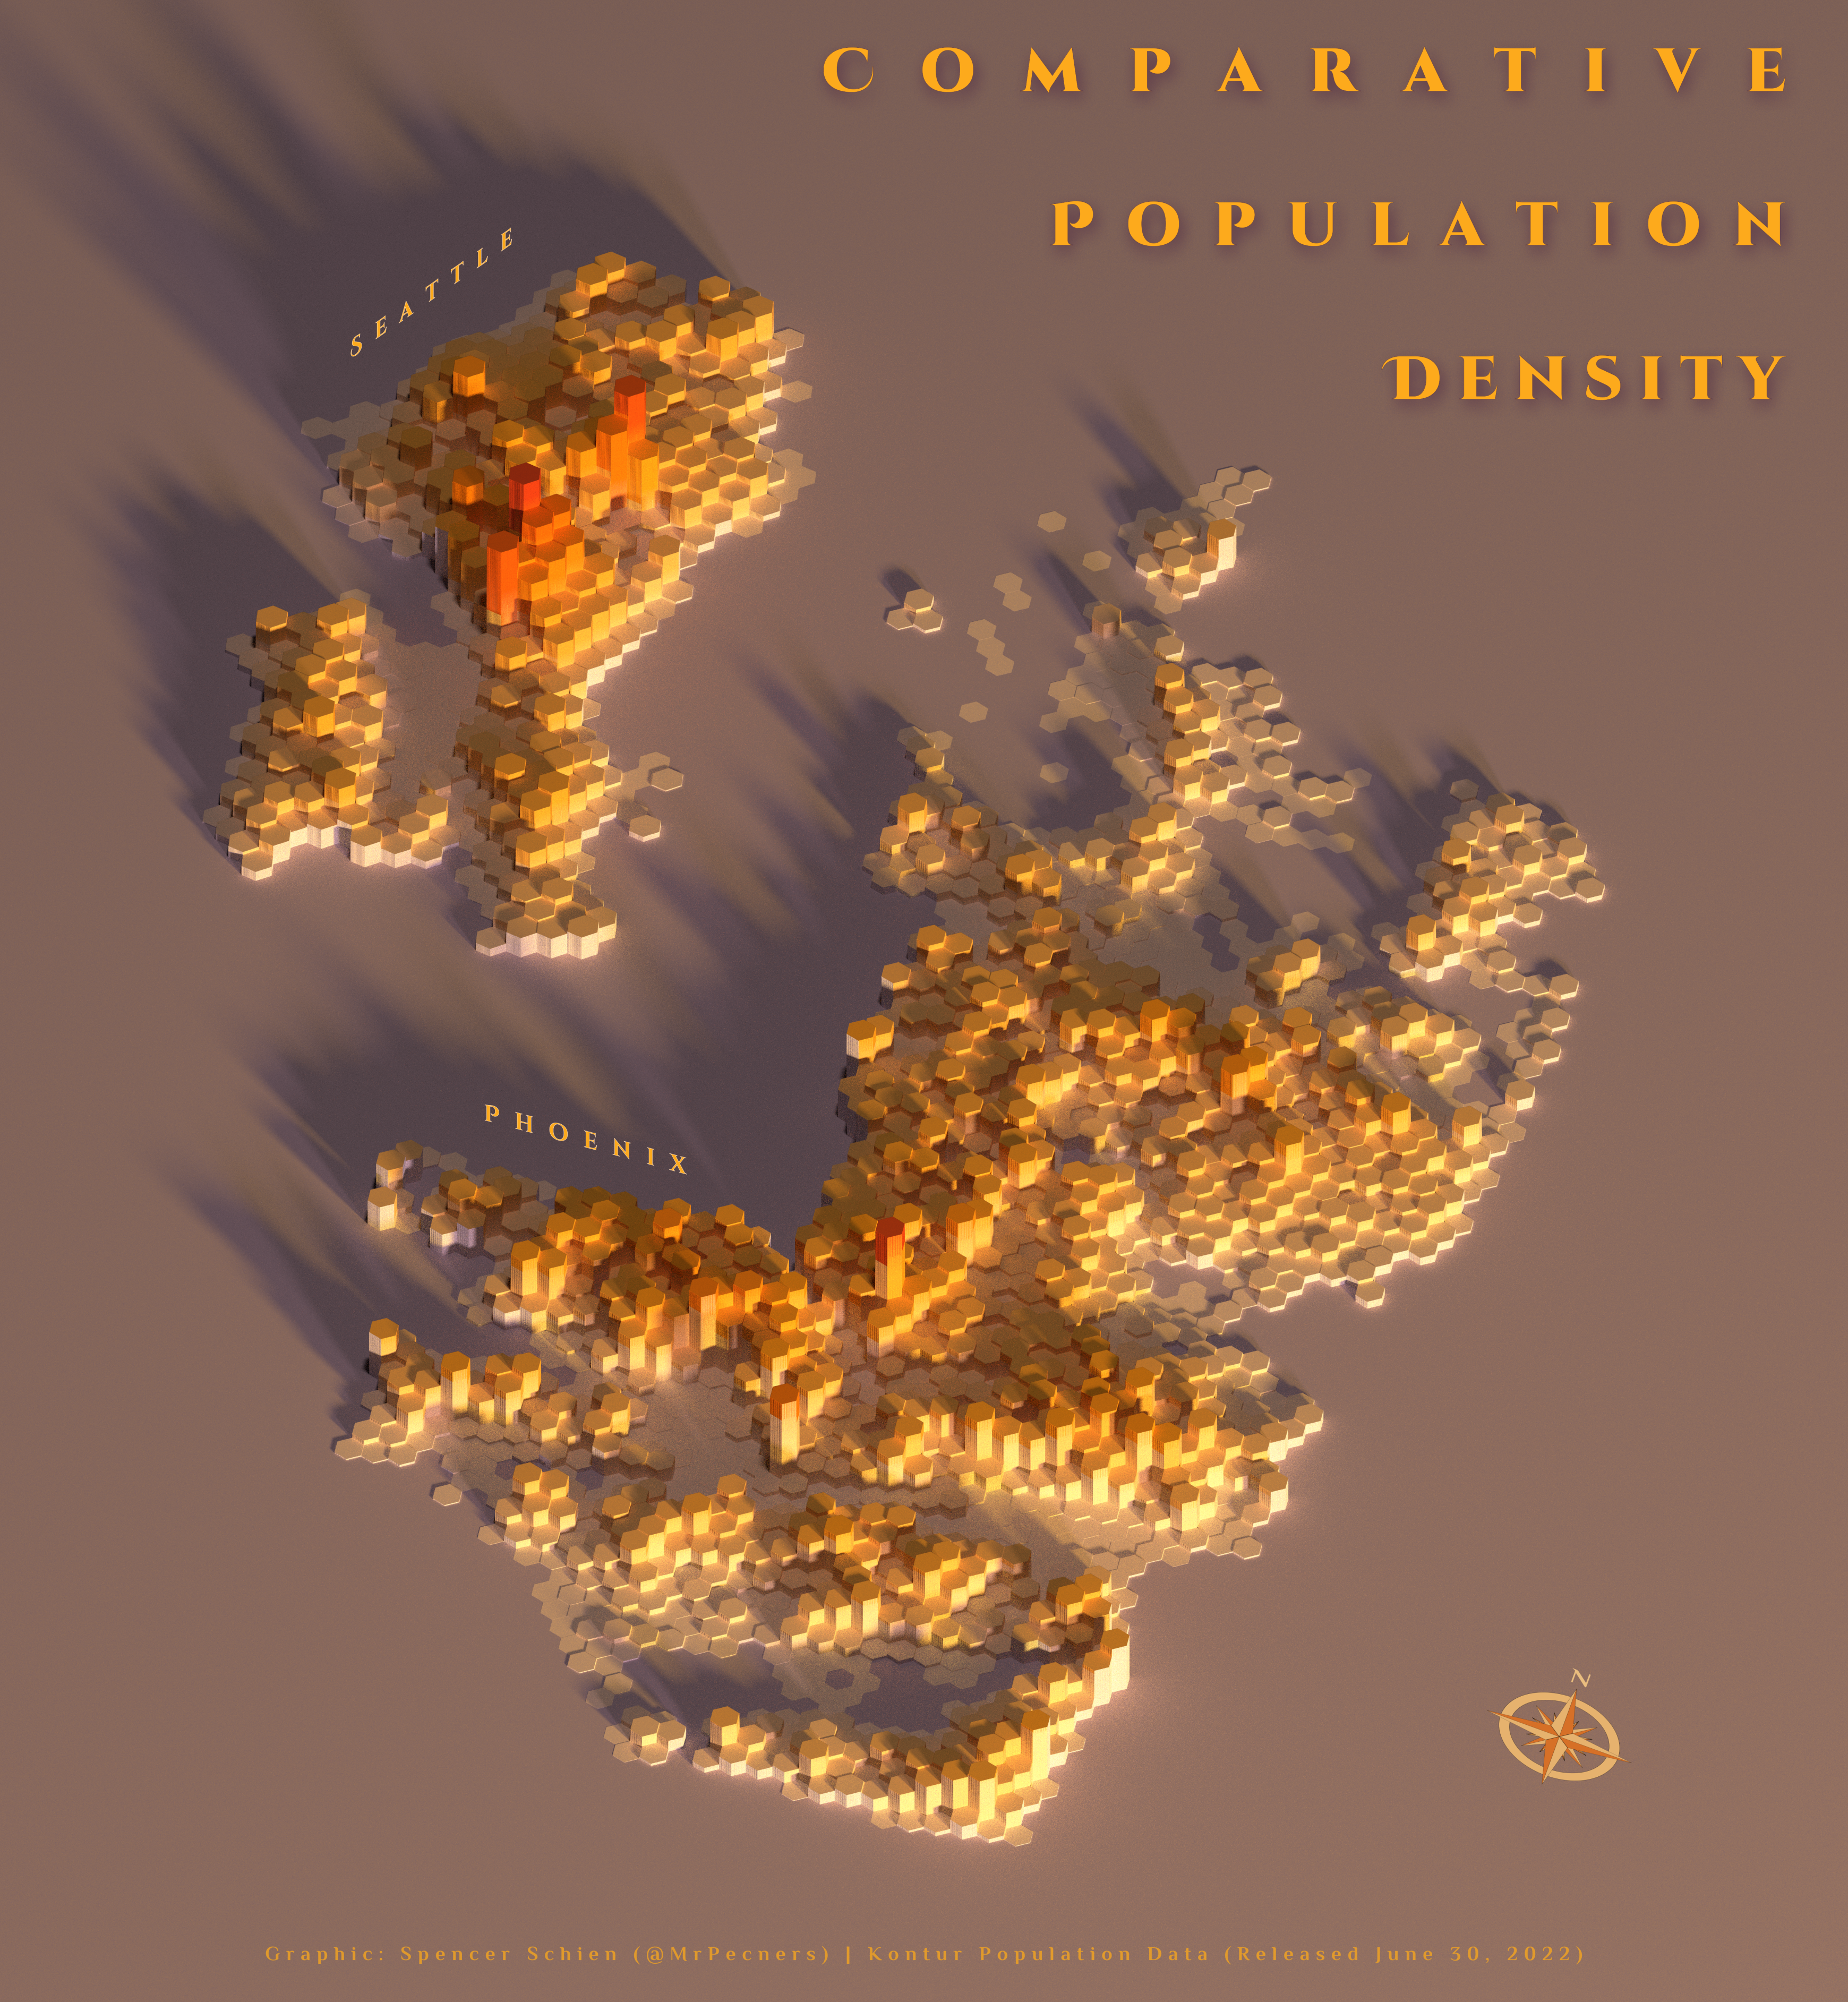 Comparative Population Density: Seattle and Phoenix